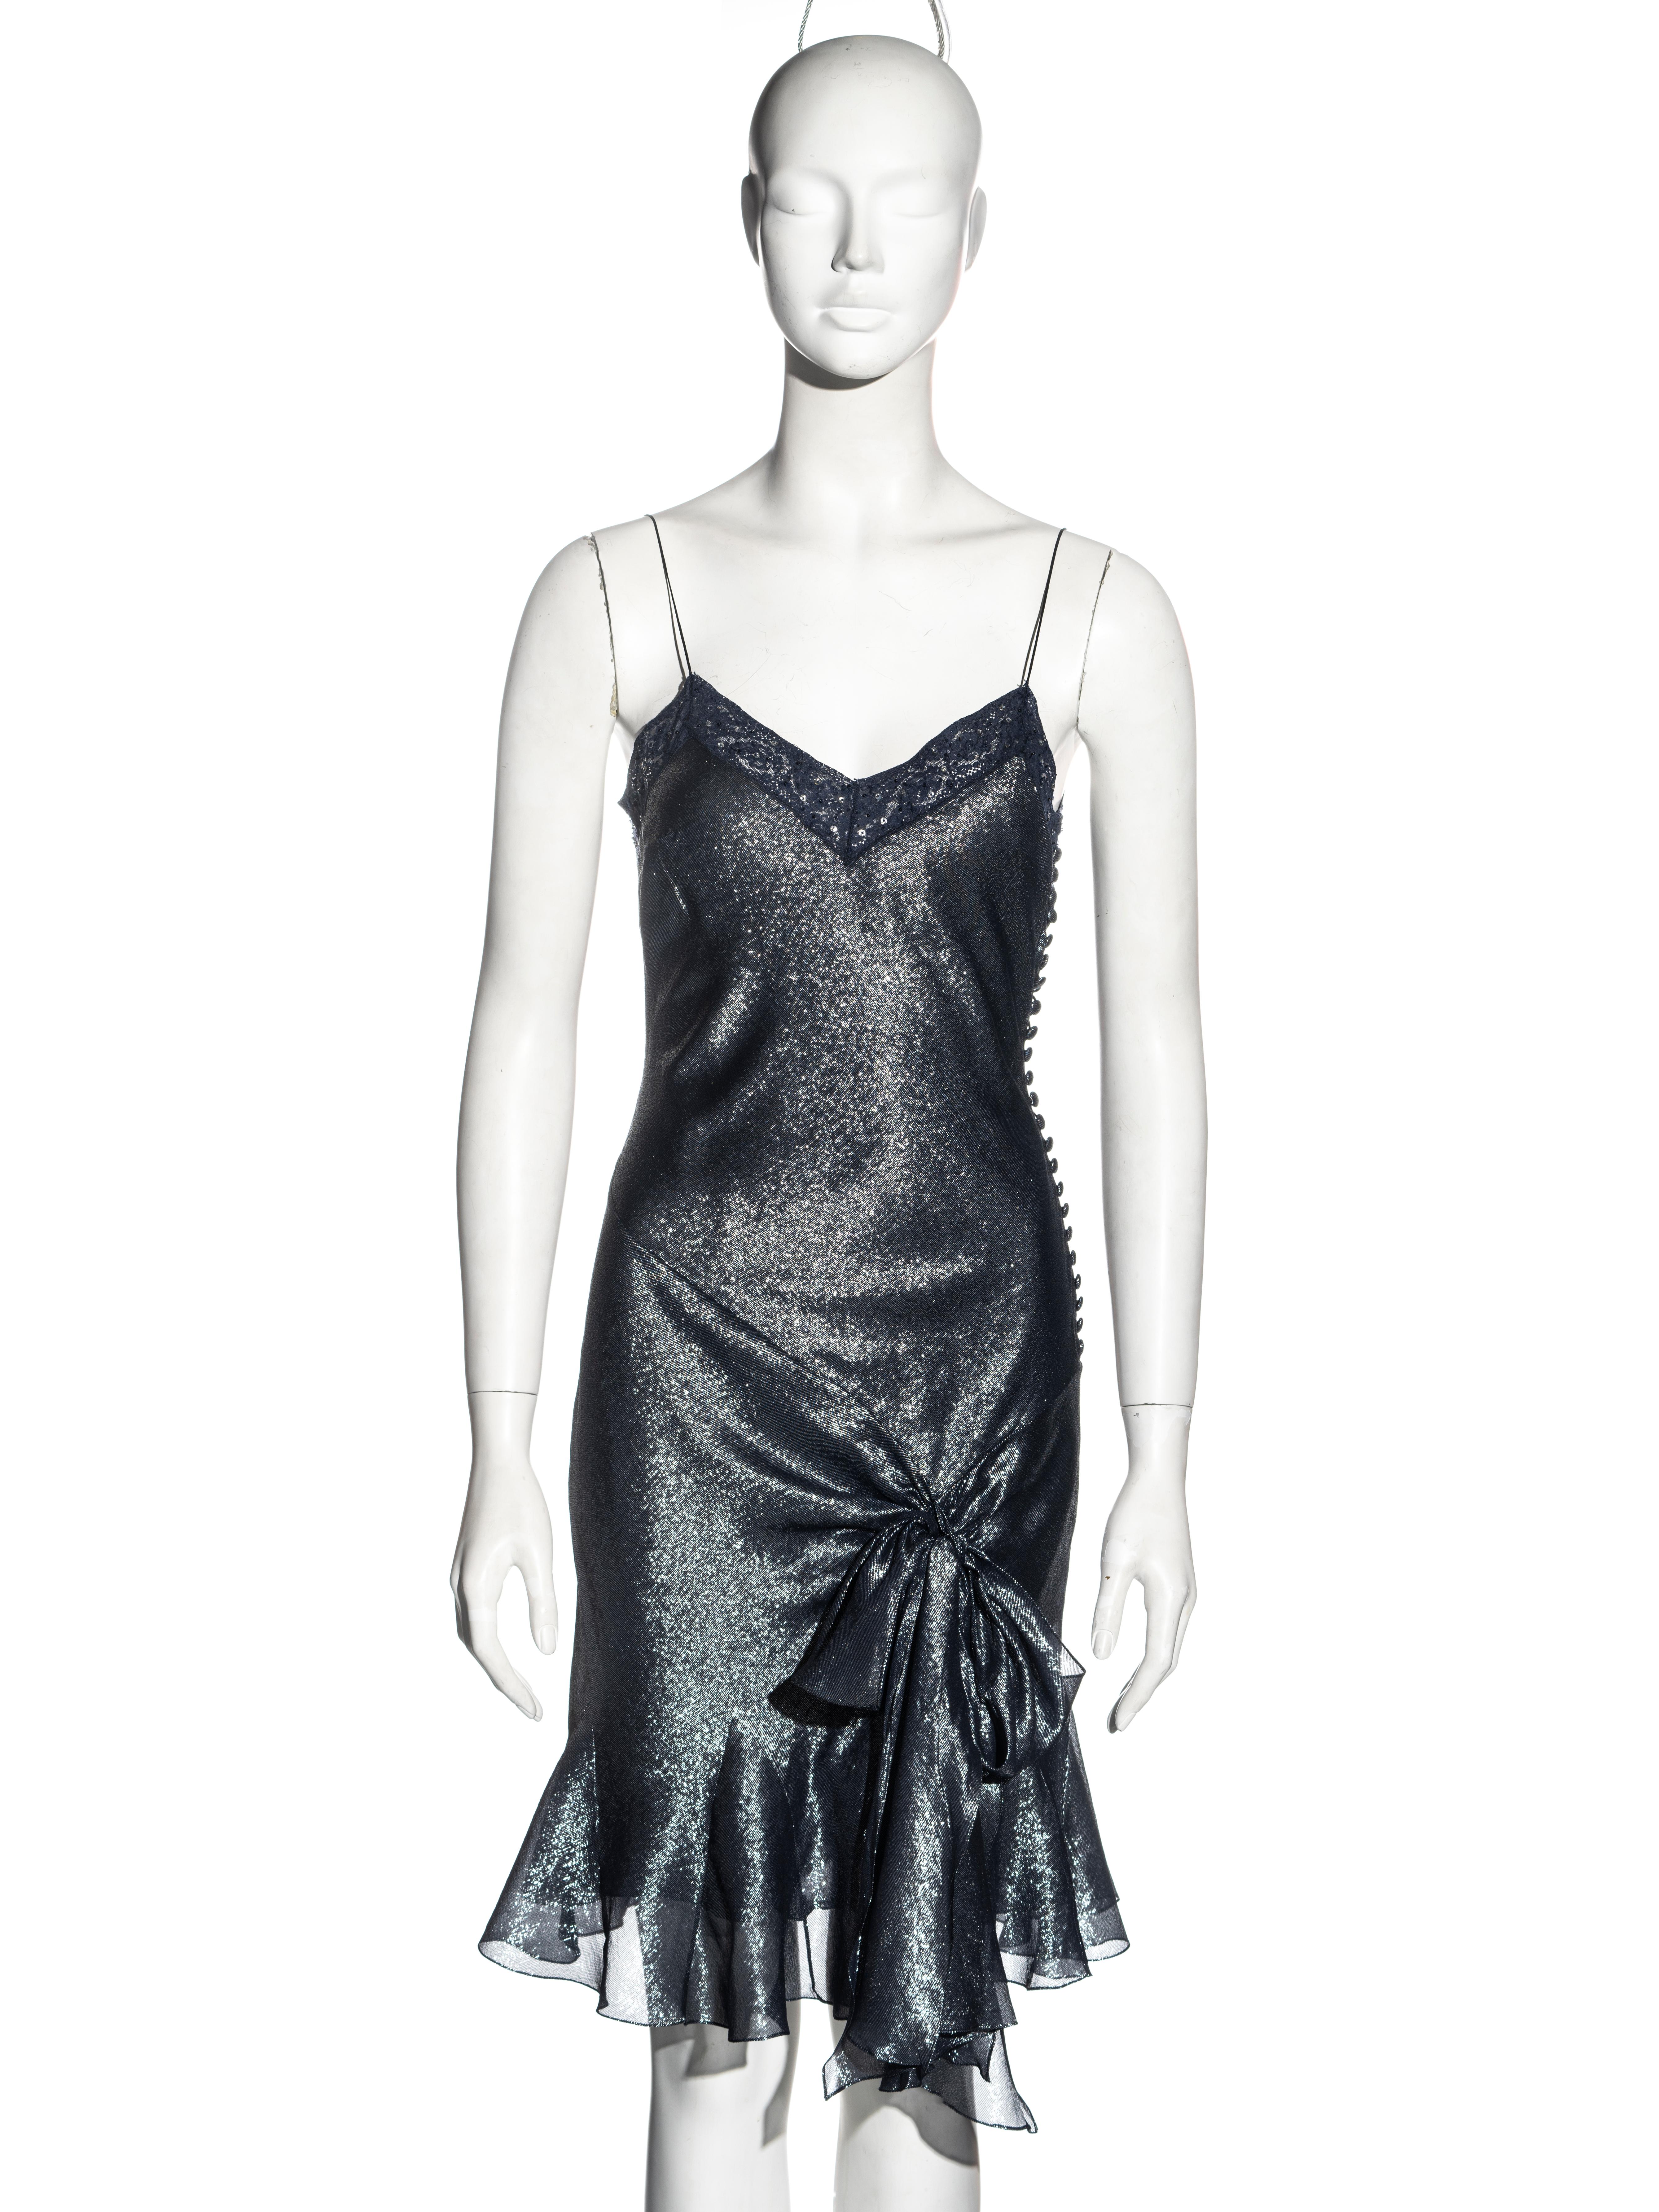 ▪ John Galliano evening slip dress
▪ Silk and lurex mix twill weave, the warp threads are silver lurex and the weft threads blue silk, giving off a lovely metallic two-tone effect
▪ Lace trim with sequin and bead embroidery 
▪ Multiple fabric